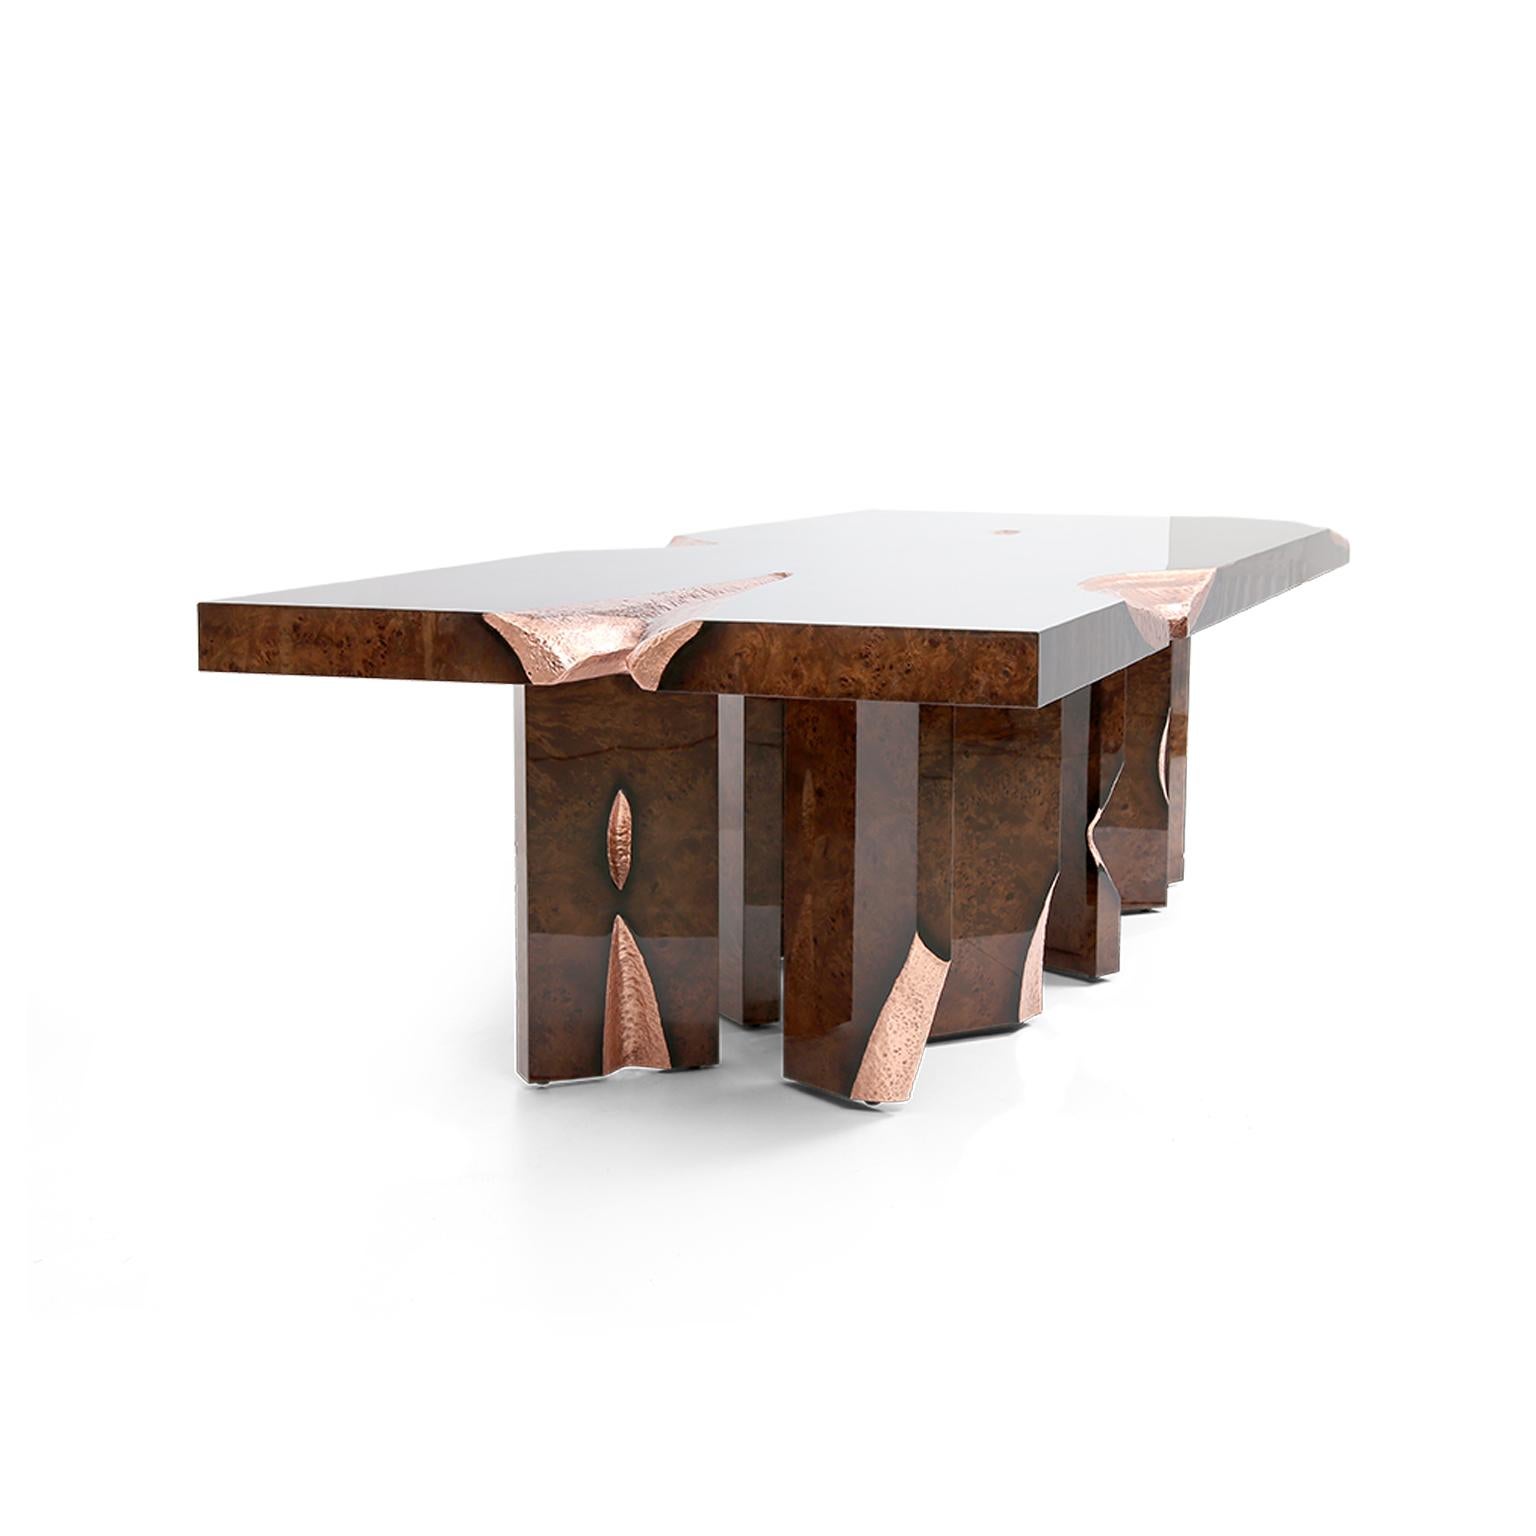 An eye-catching interplay of shapes and proportions, this skillfully engineered table is a hallmark of excellence in craftsmanship and an innovative design. The style of this exclusive table set this piece apart from any stereotypes. The multiple